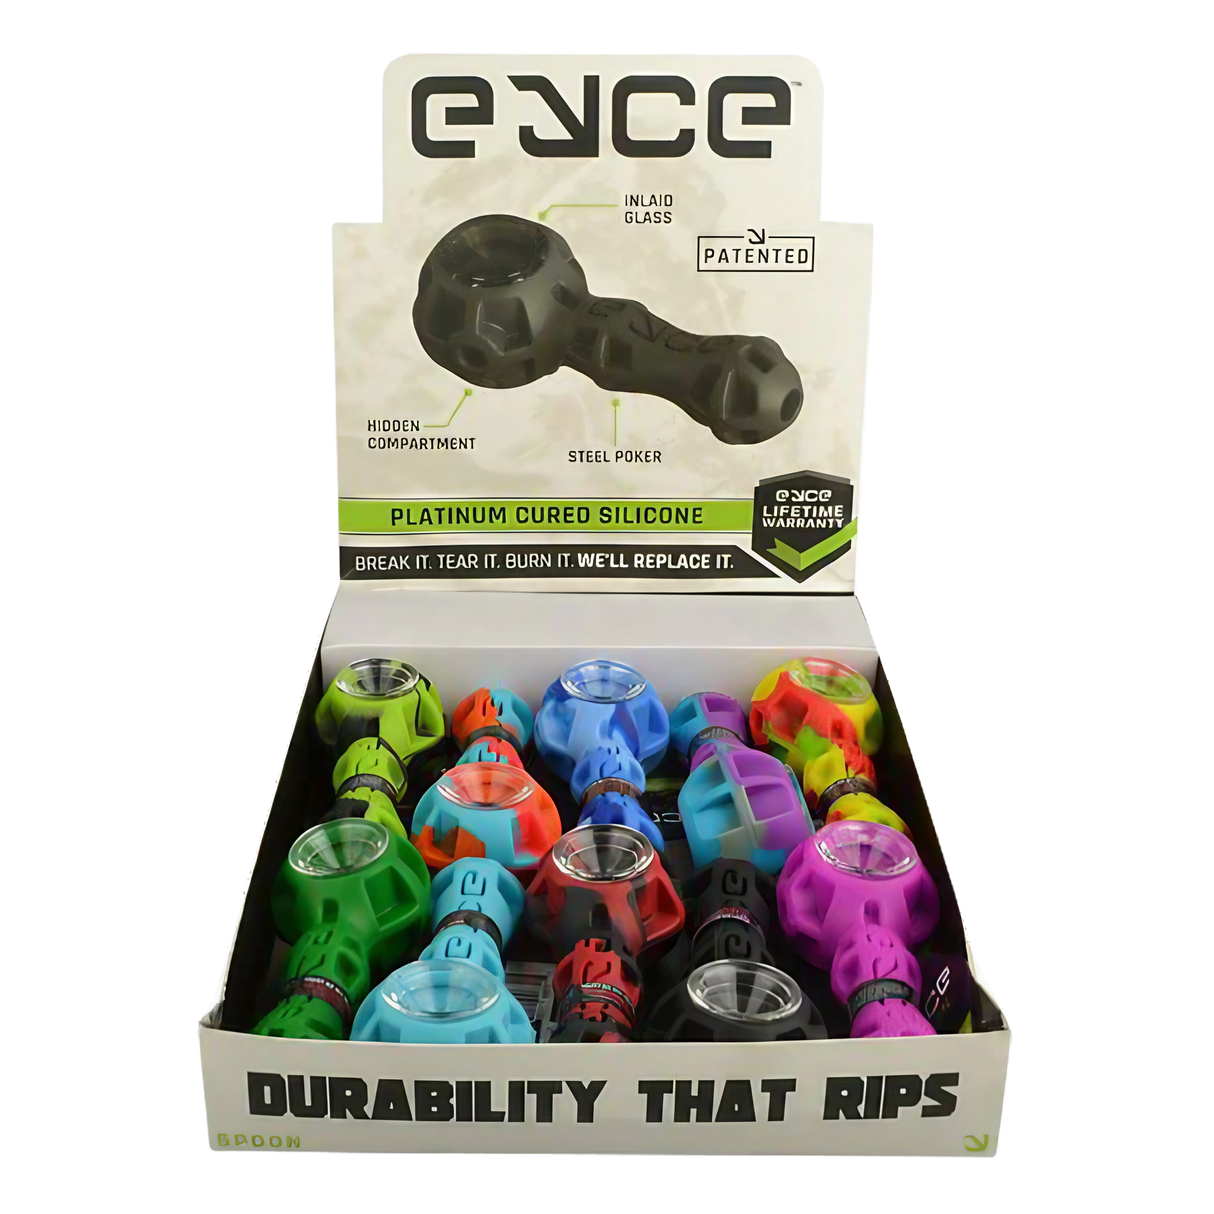 EYCE Silicone Spoon Pipes in assorted colors displayed in a 10 pack box, front view with branding